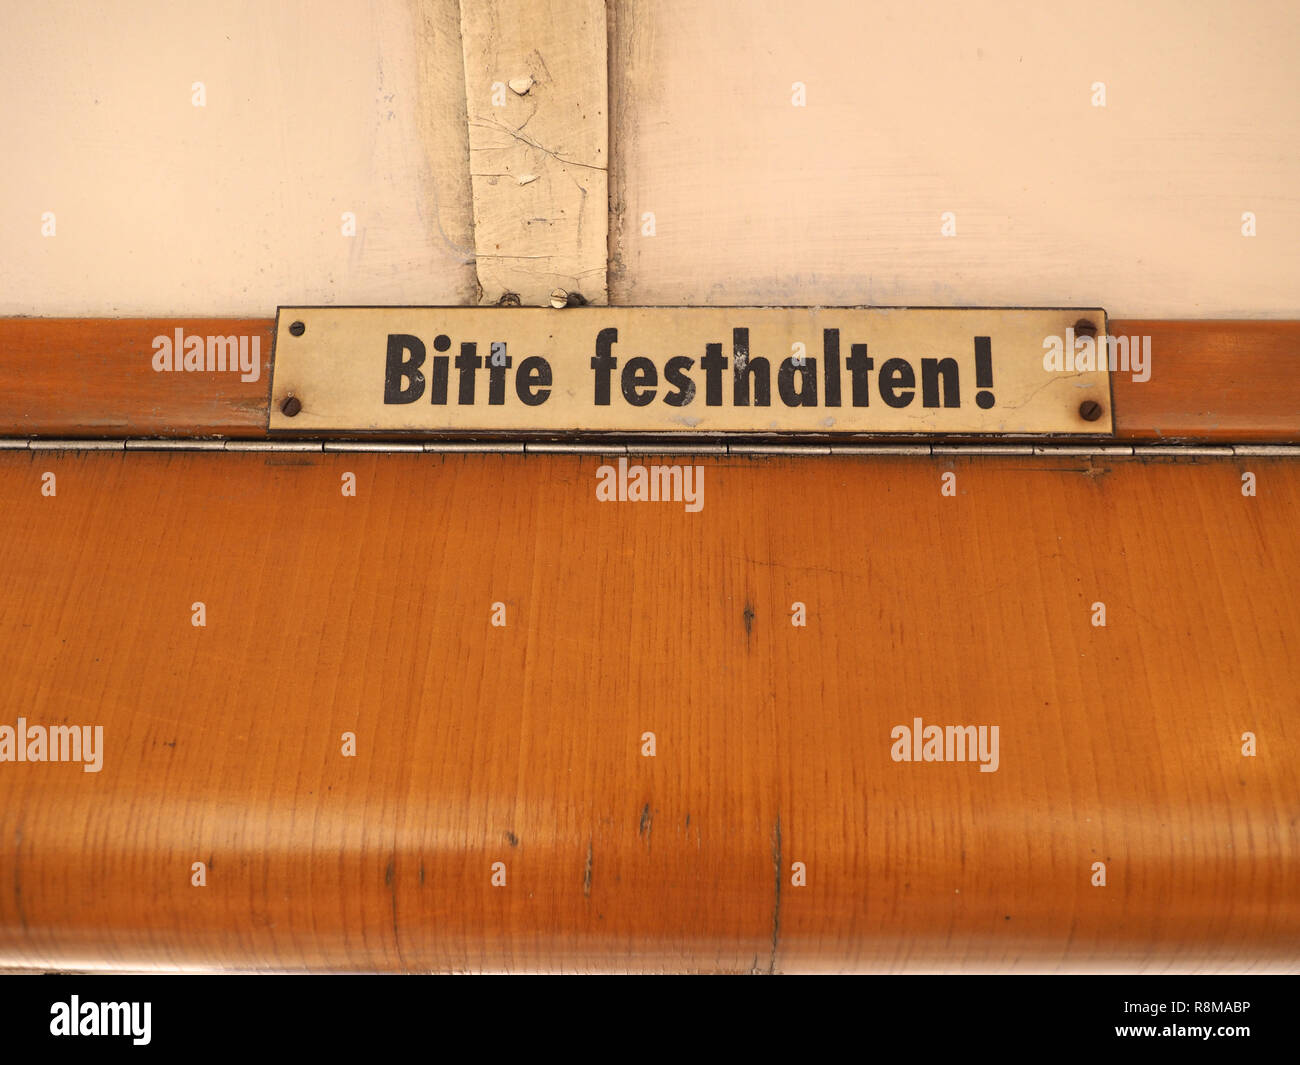 Bitte festhalten (meaning Please hold tight) sign on vintage German tram Stock Photo